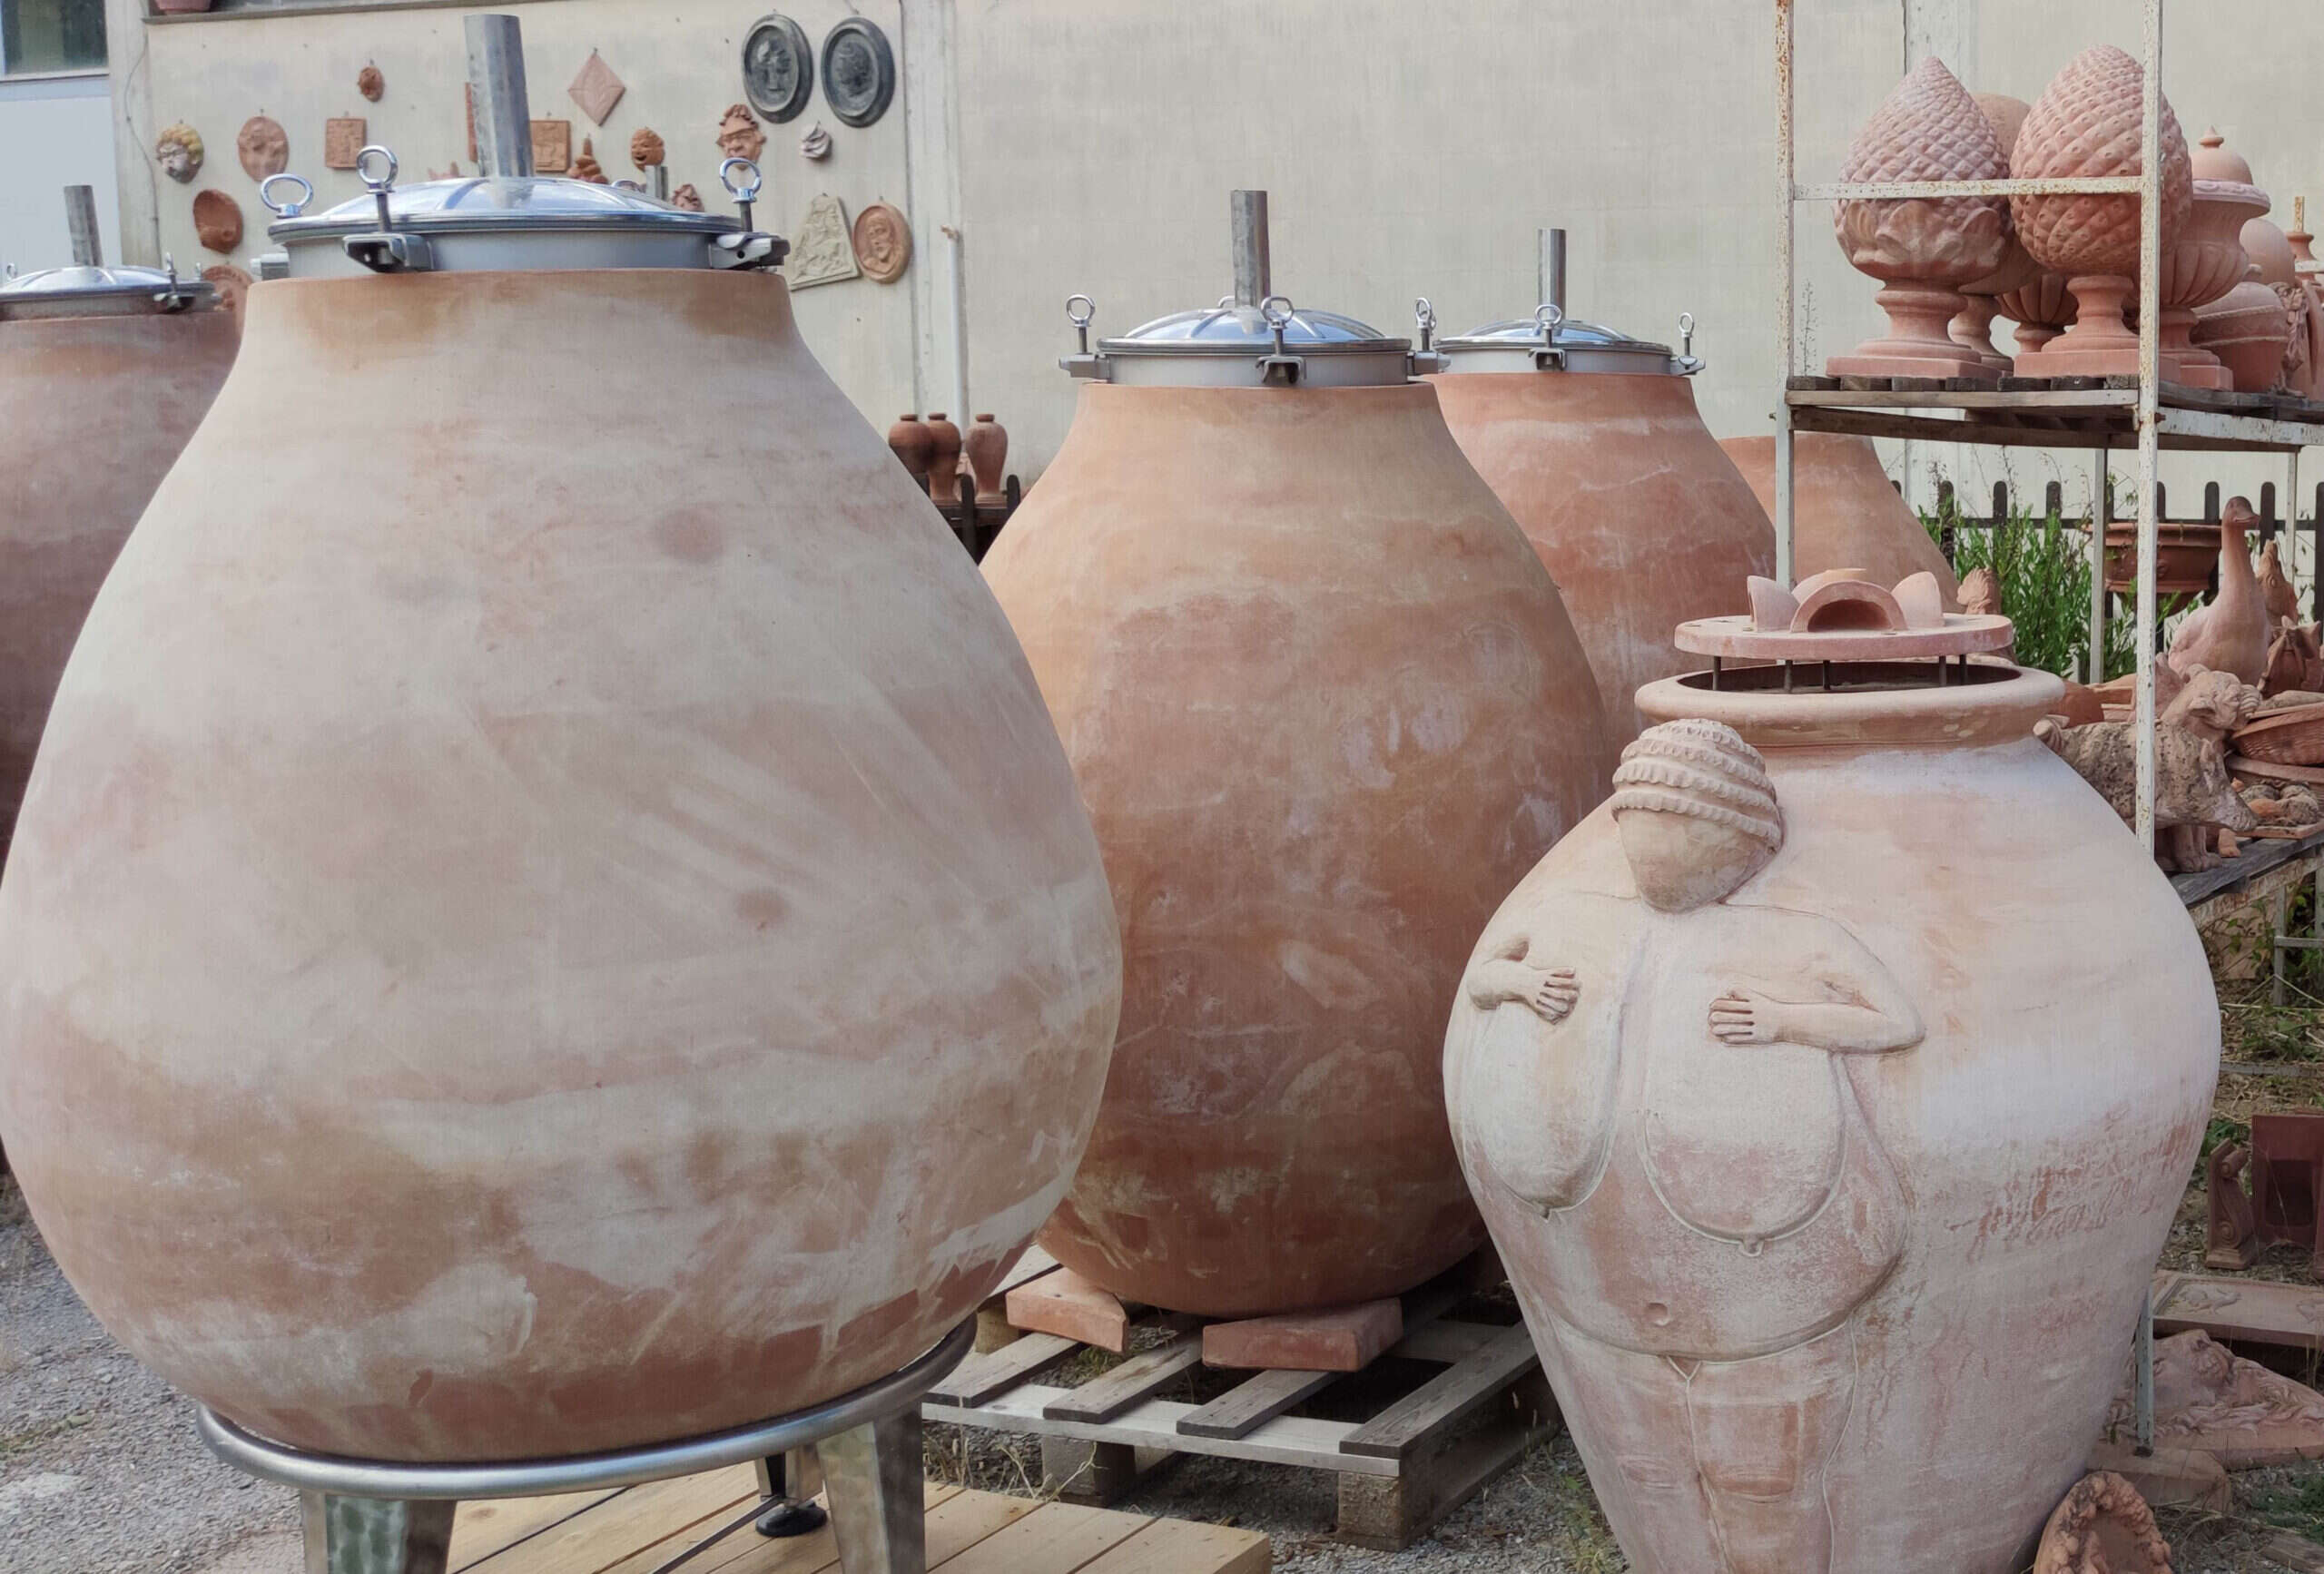 Terracotta Clay Pots - old fashioned, yet new again